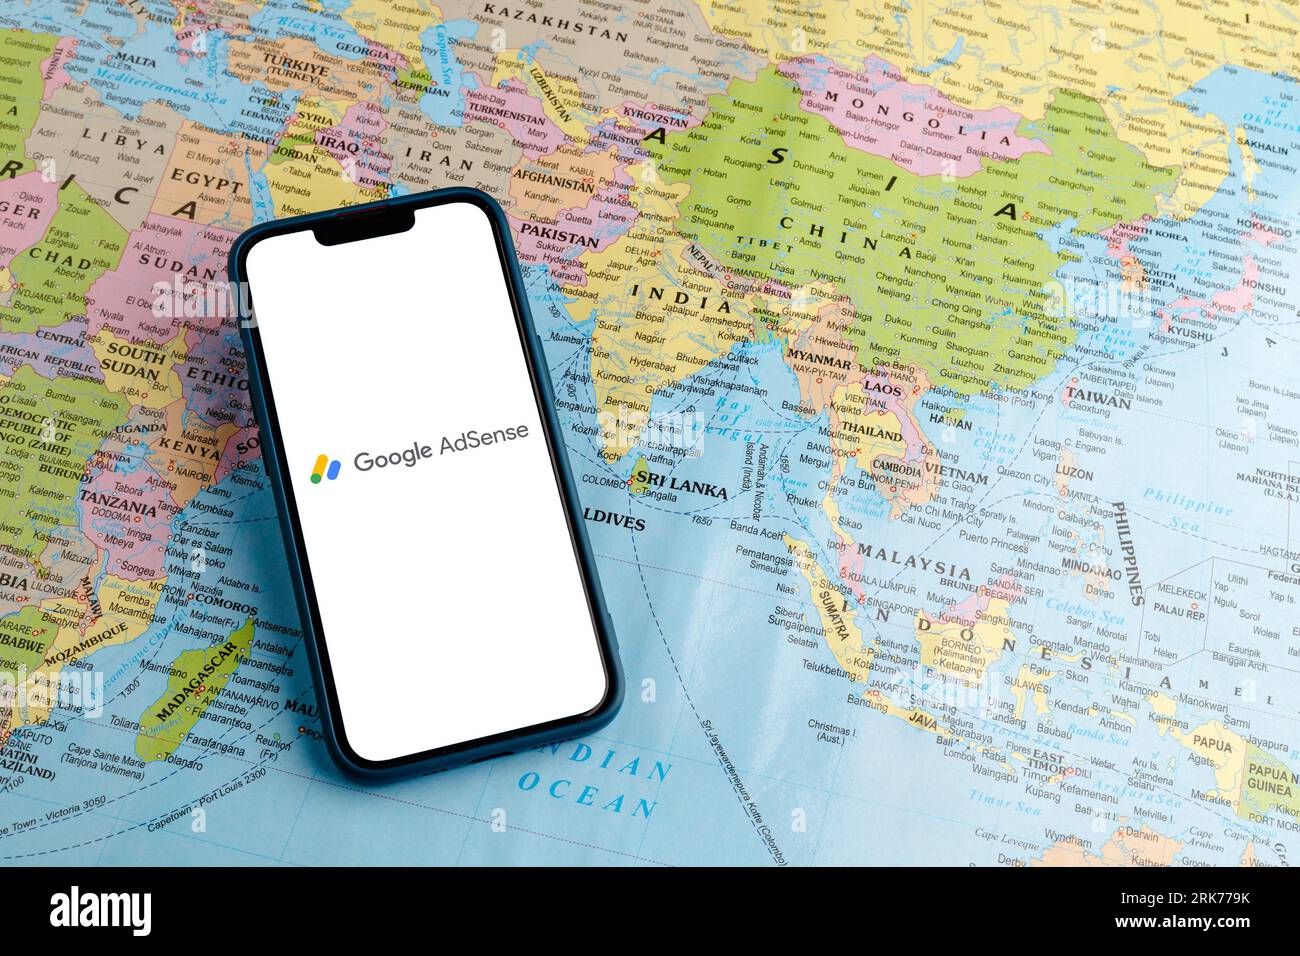 A modern smartphone with a Google Ads logo displayed on the screen. Stock Photo